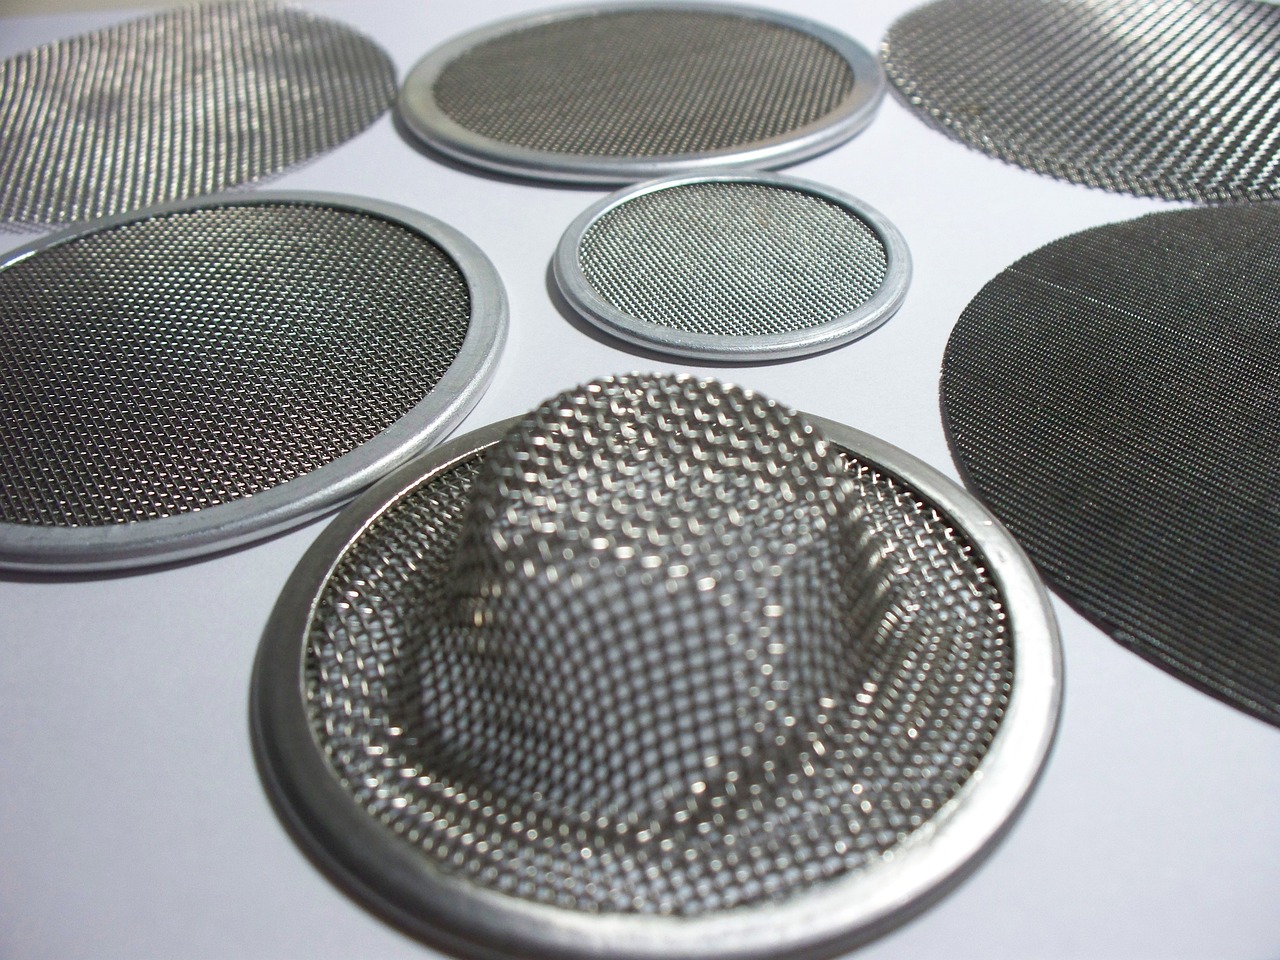 Clean Filters - Tips for Maximizing Your Air Conditioning System